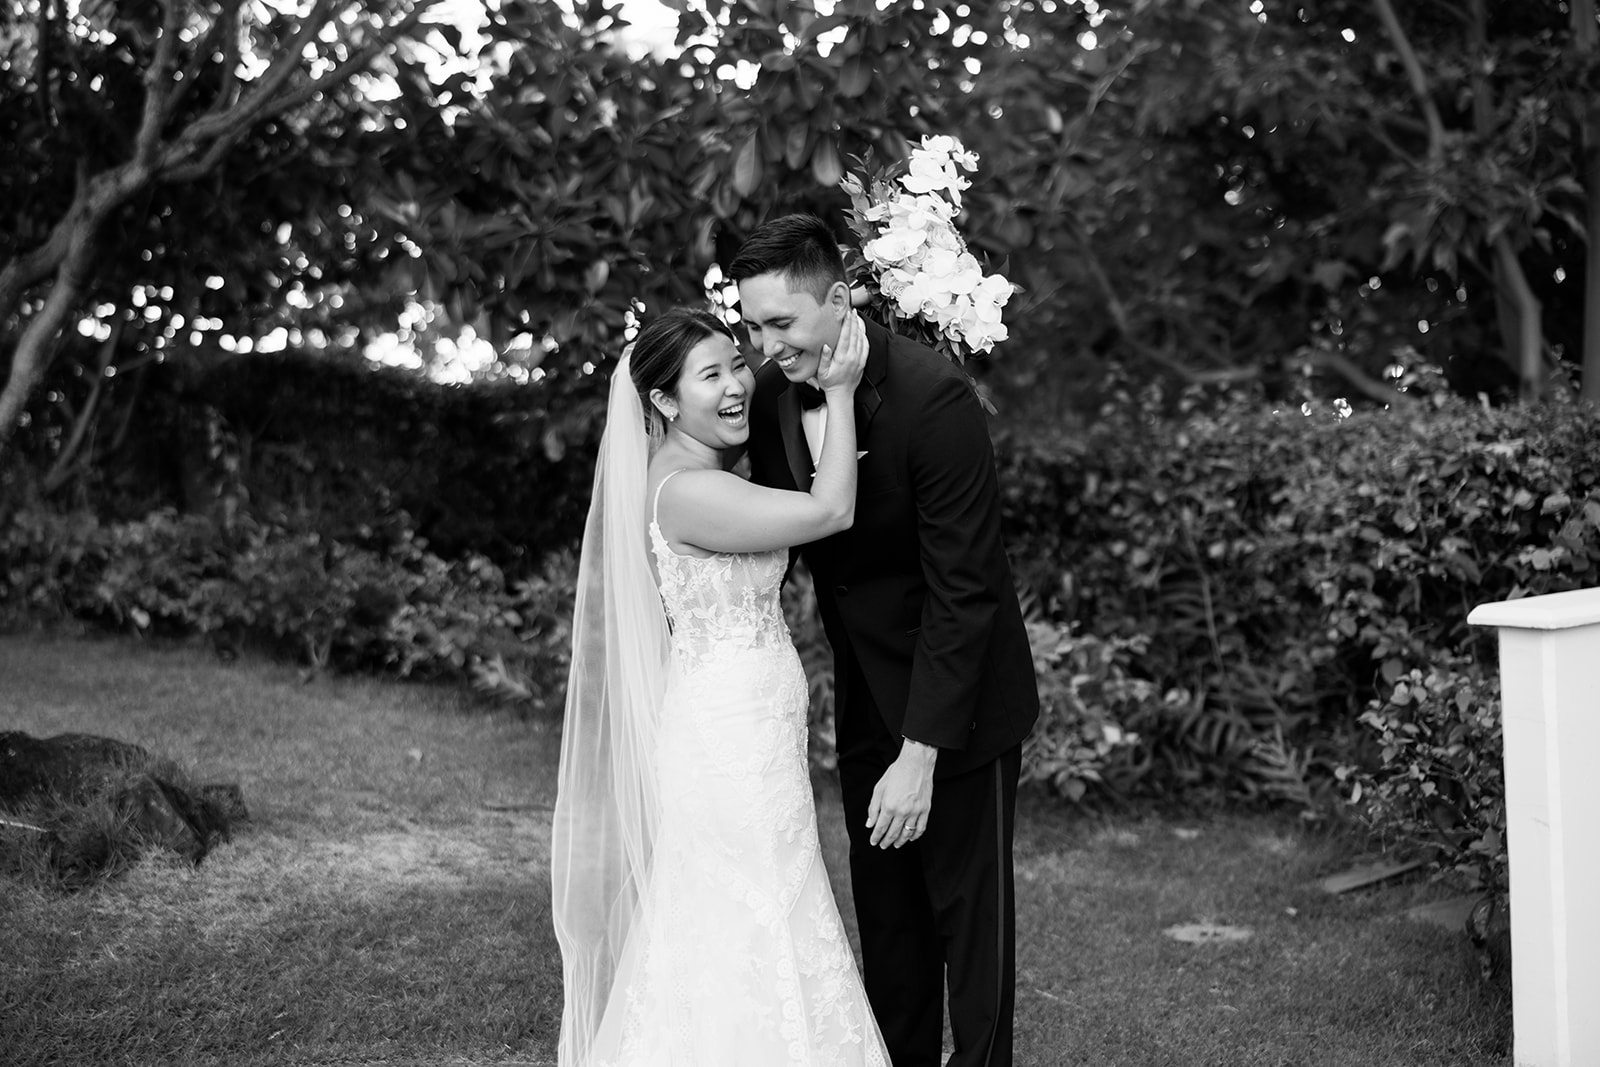 A happy bride and groom hugging in front of bushes.